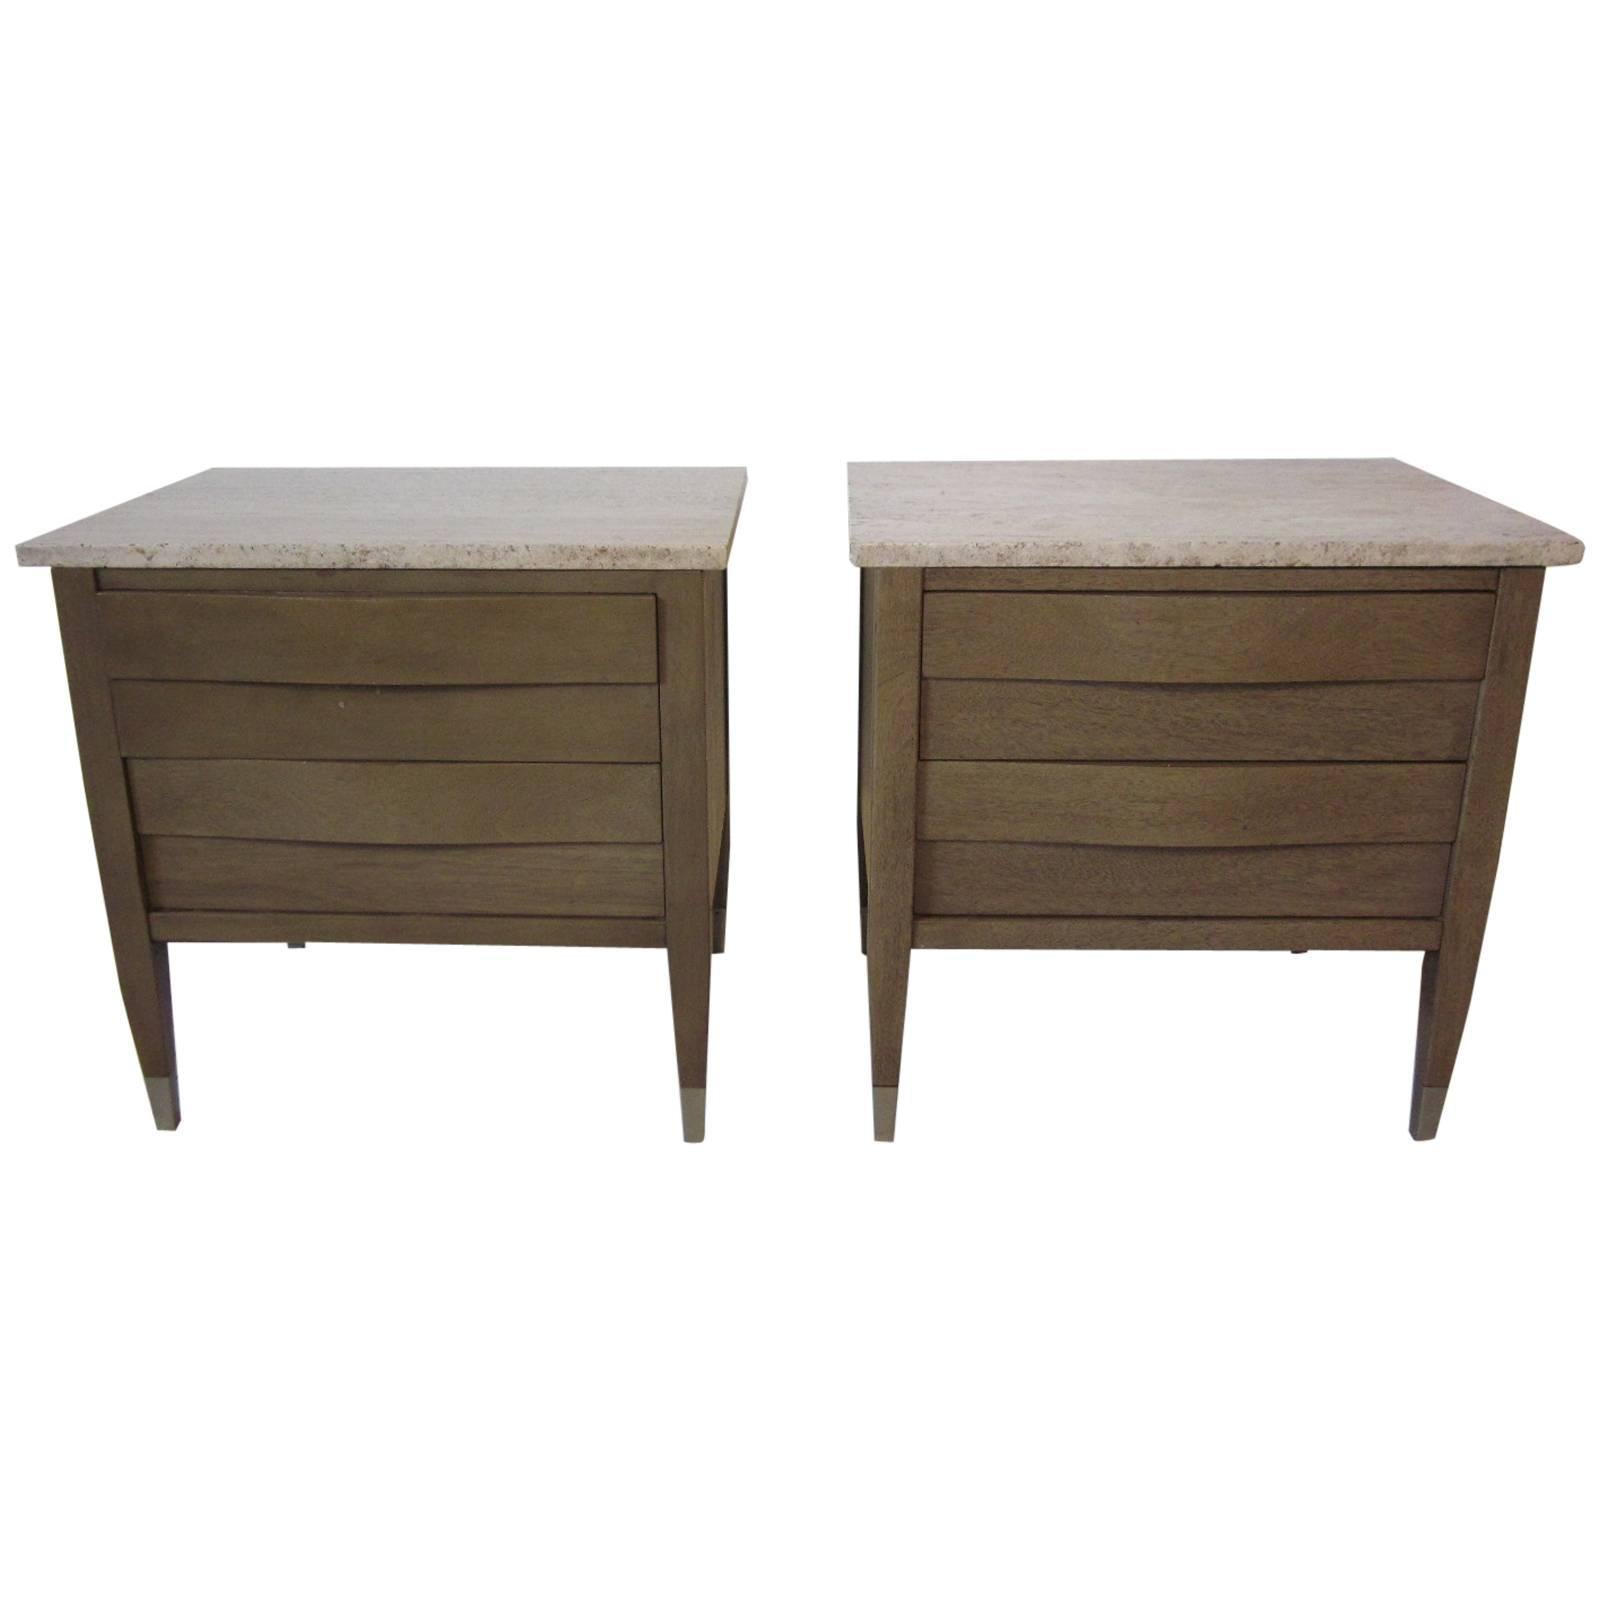 Italian Travertine Topped Nightstands or End Tables